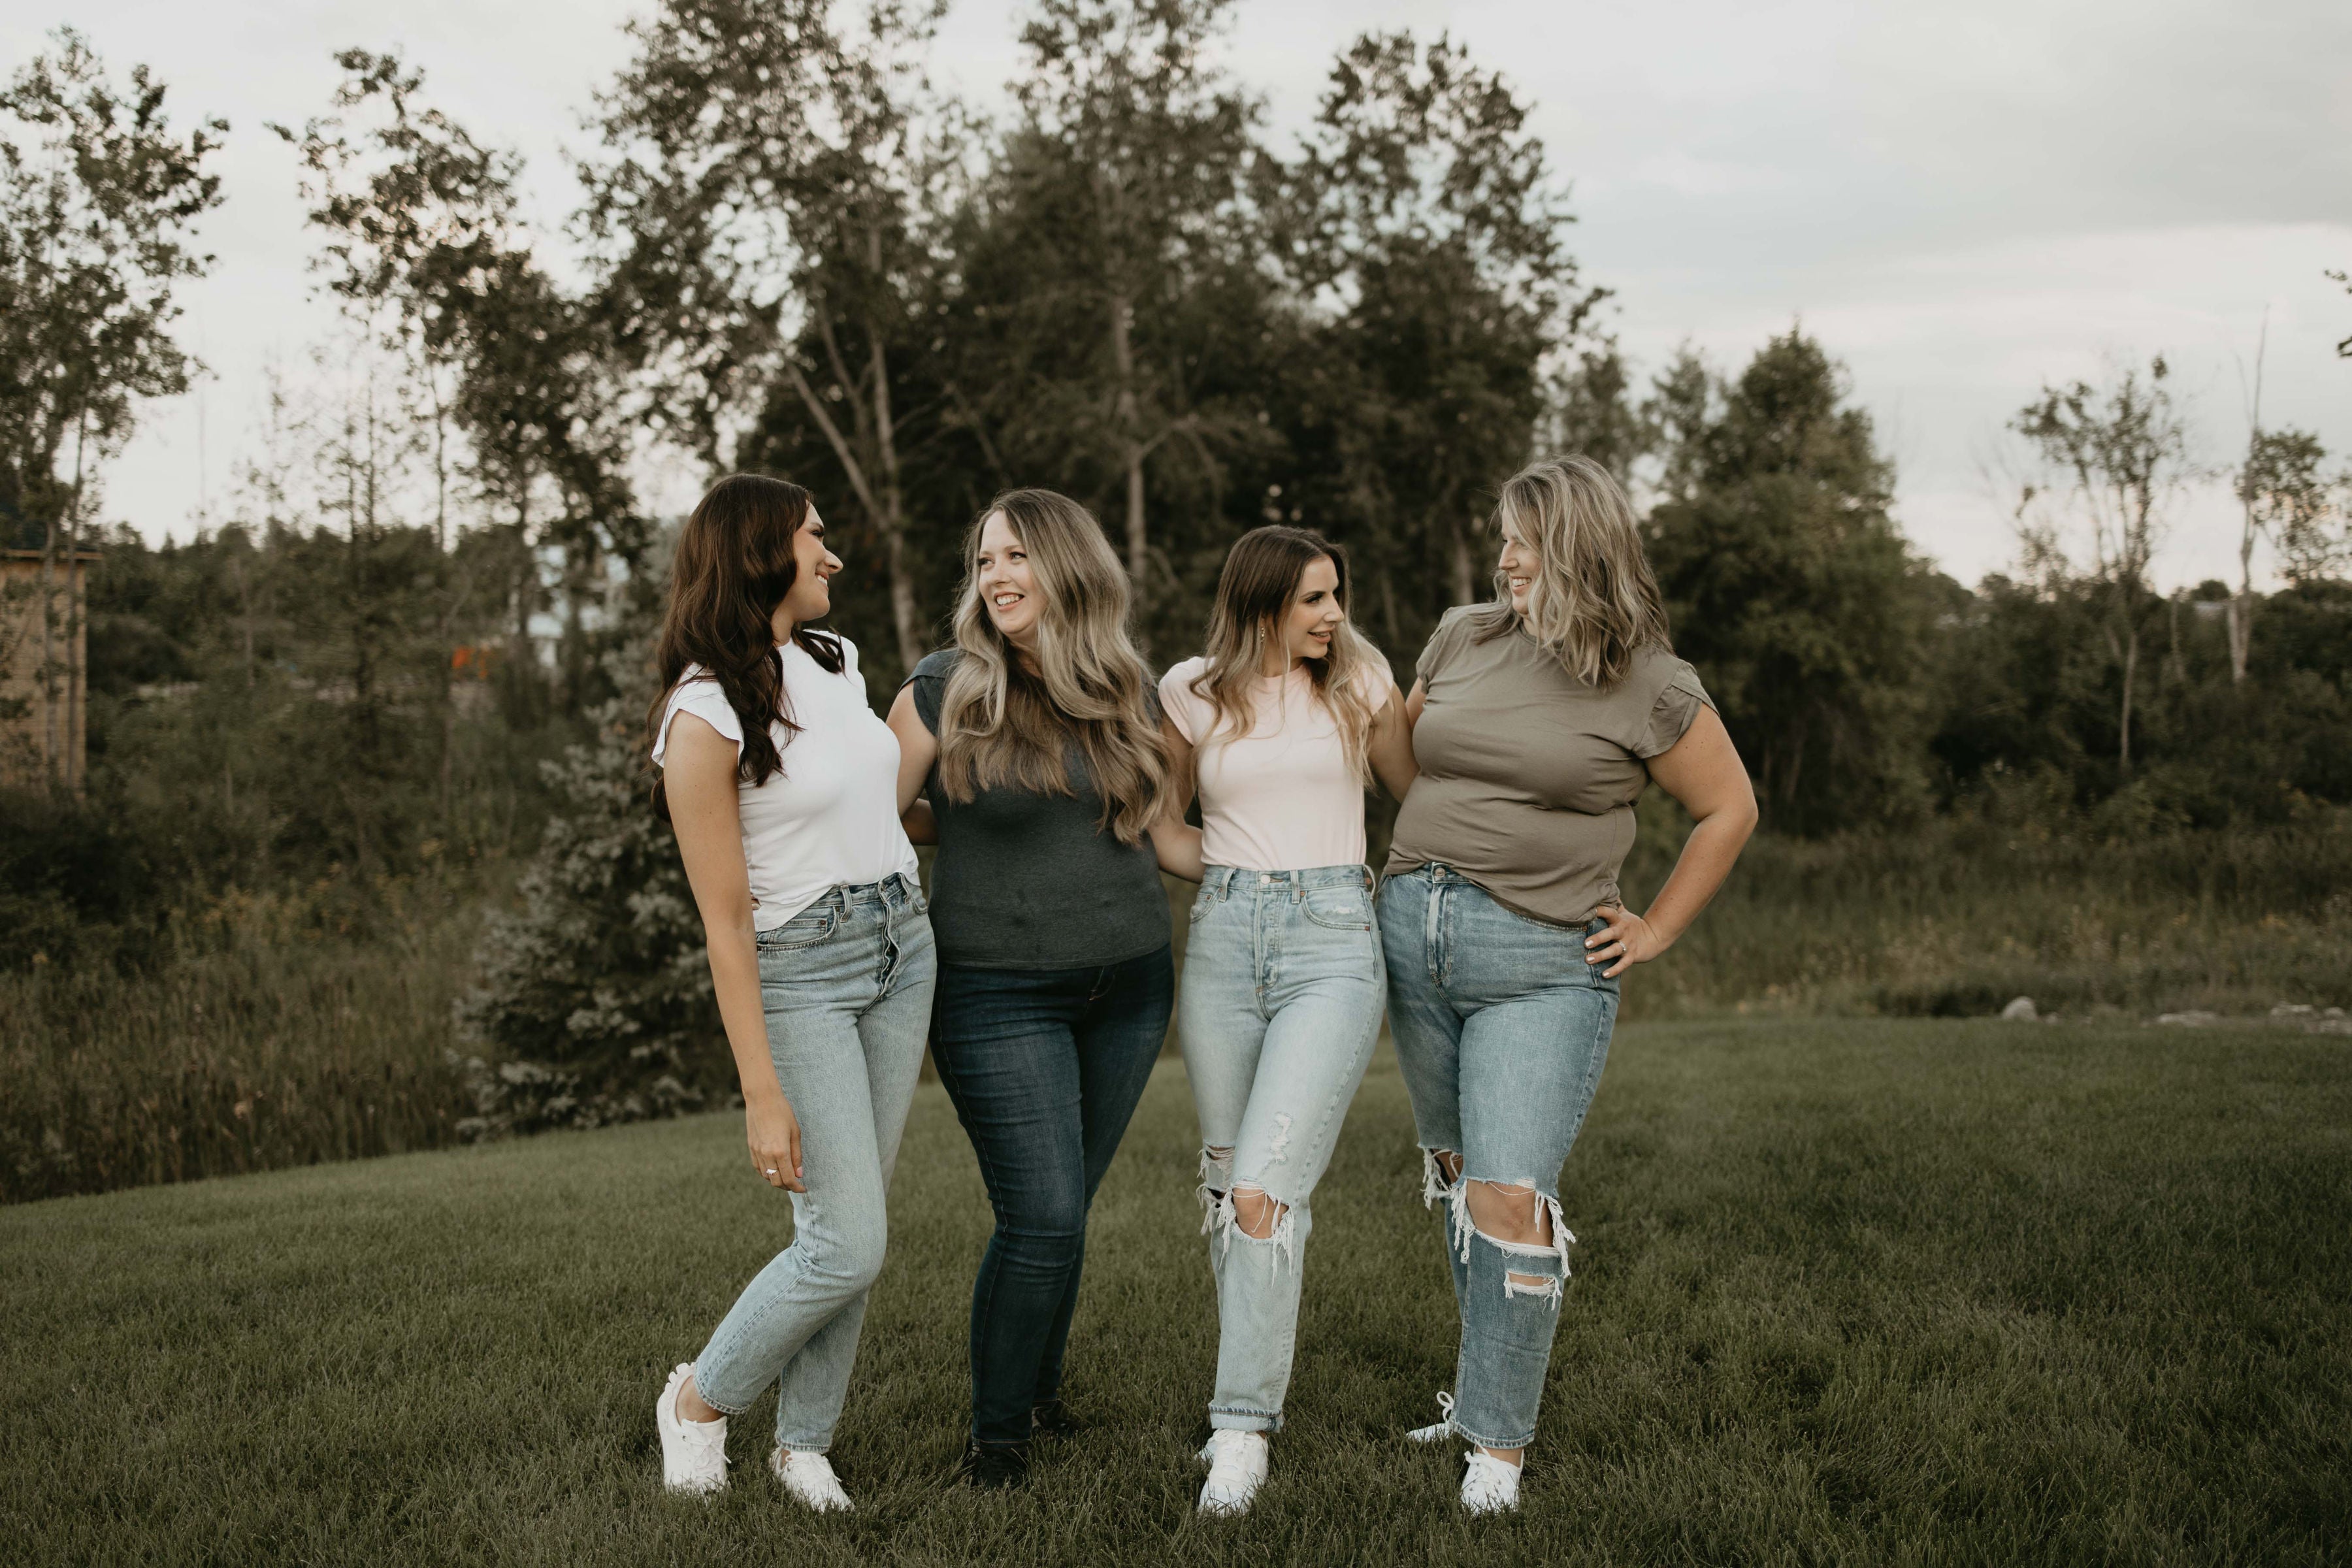 women standing together in jeans and a t-shirt